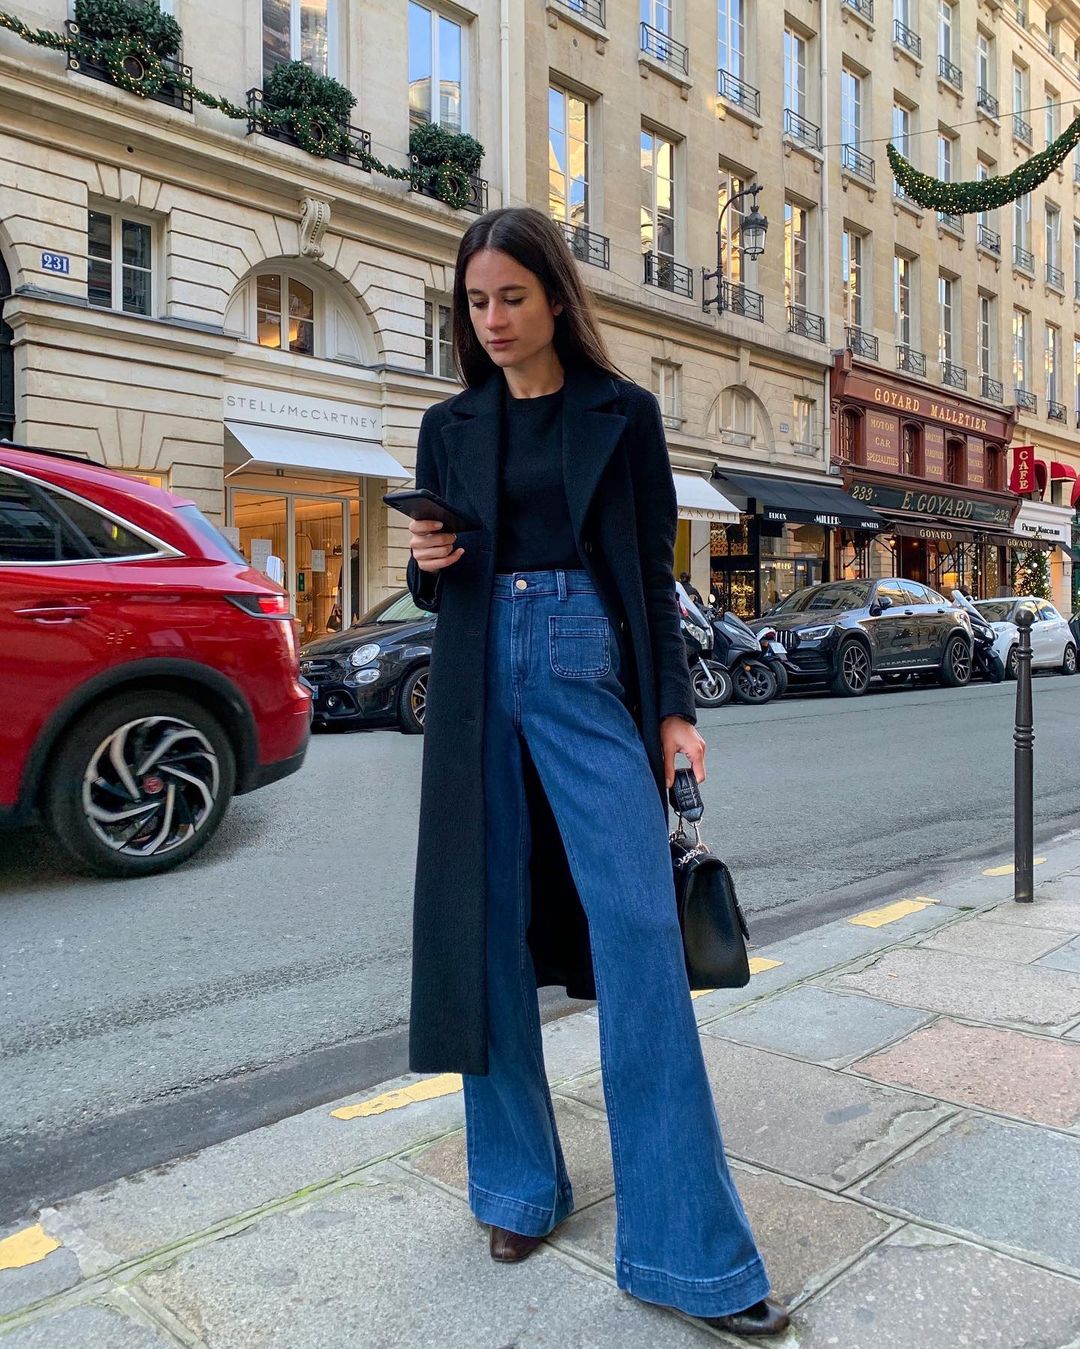 The 10 Best Flare Jeans That Look So Flattering | Who What Wear